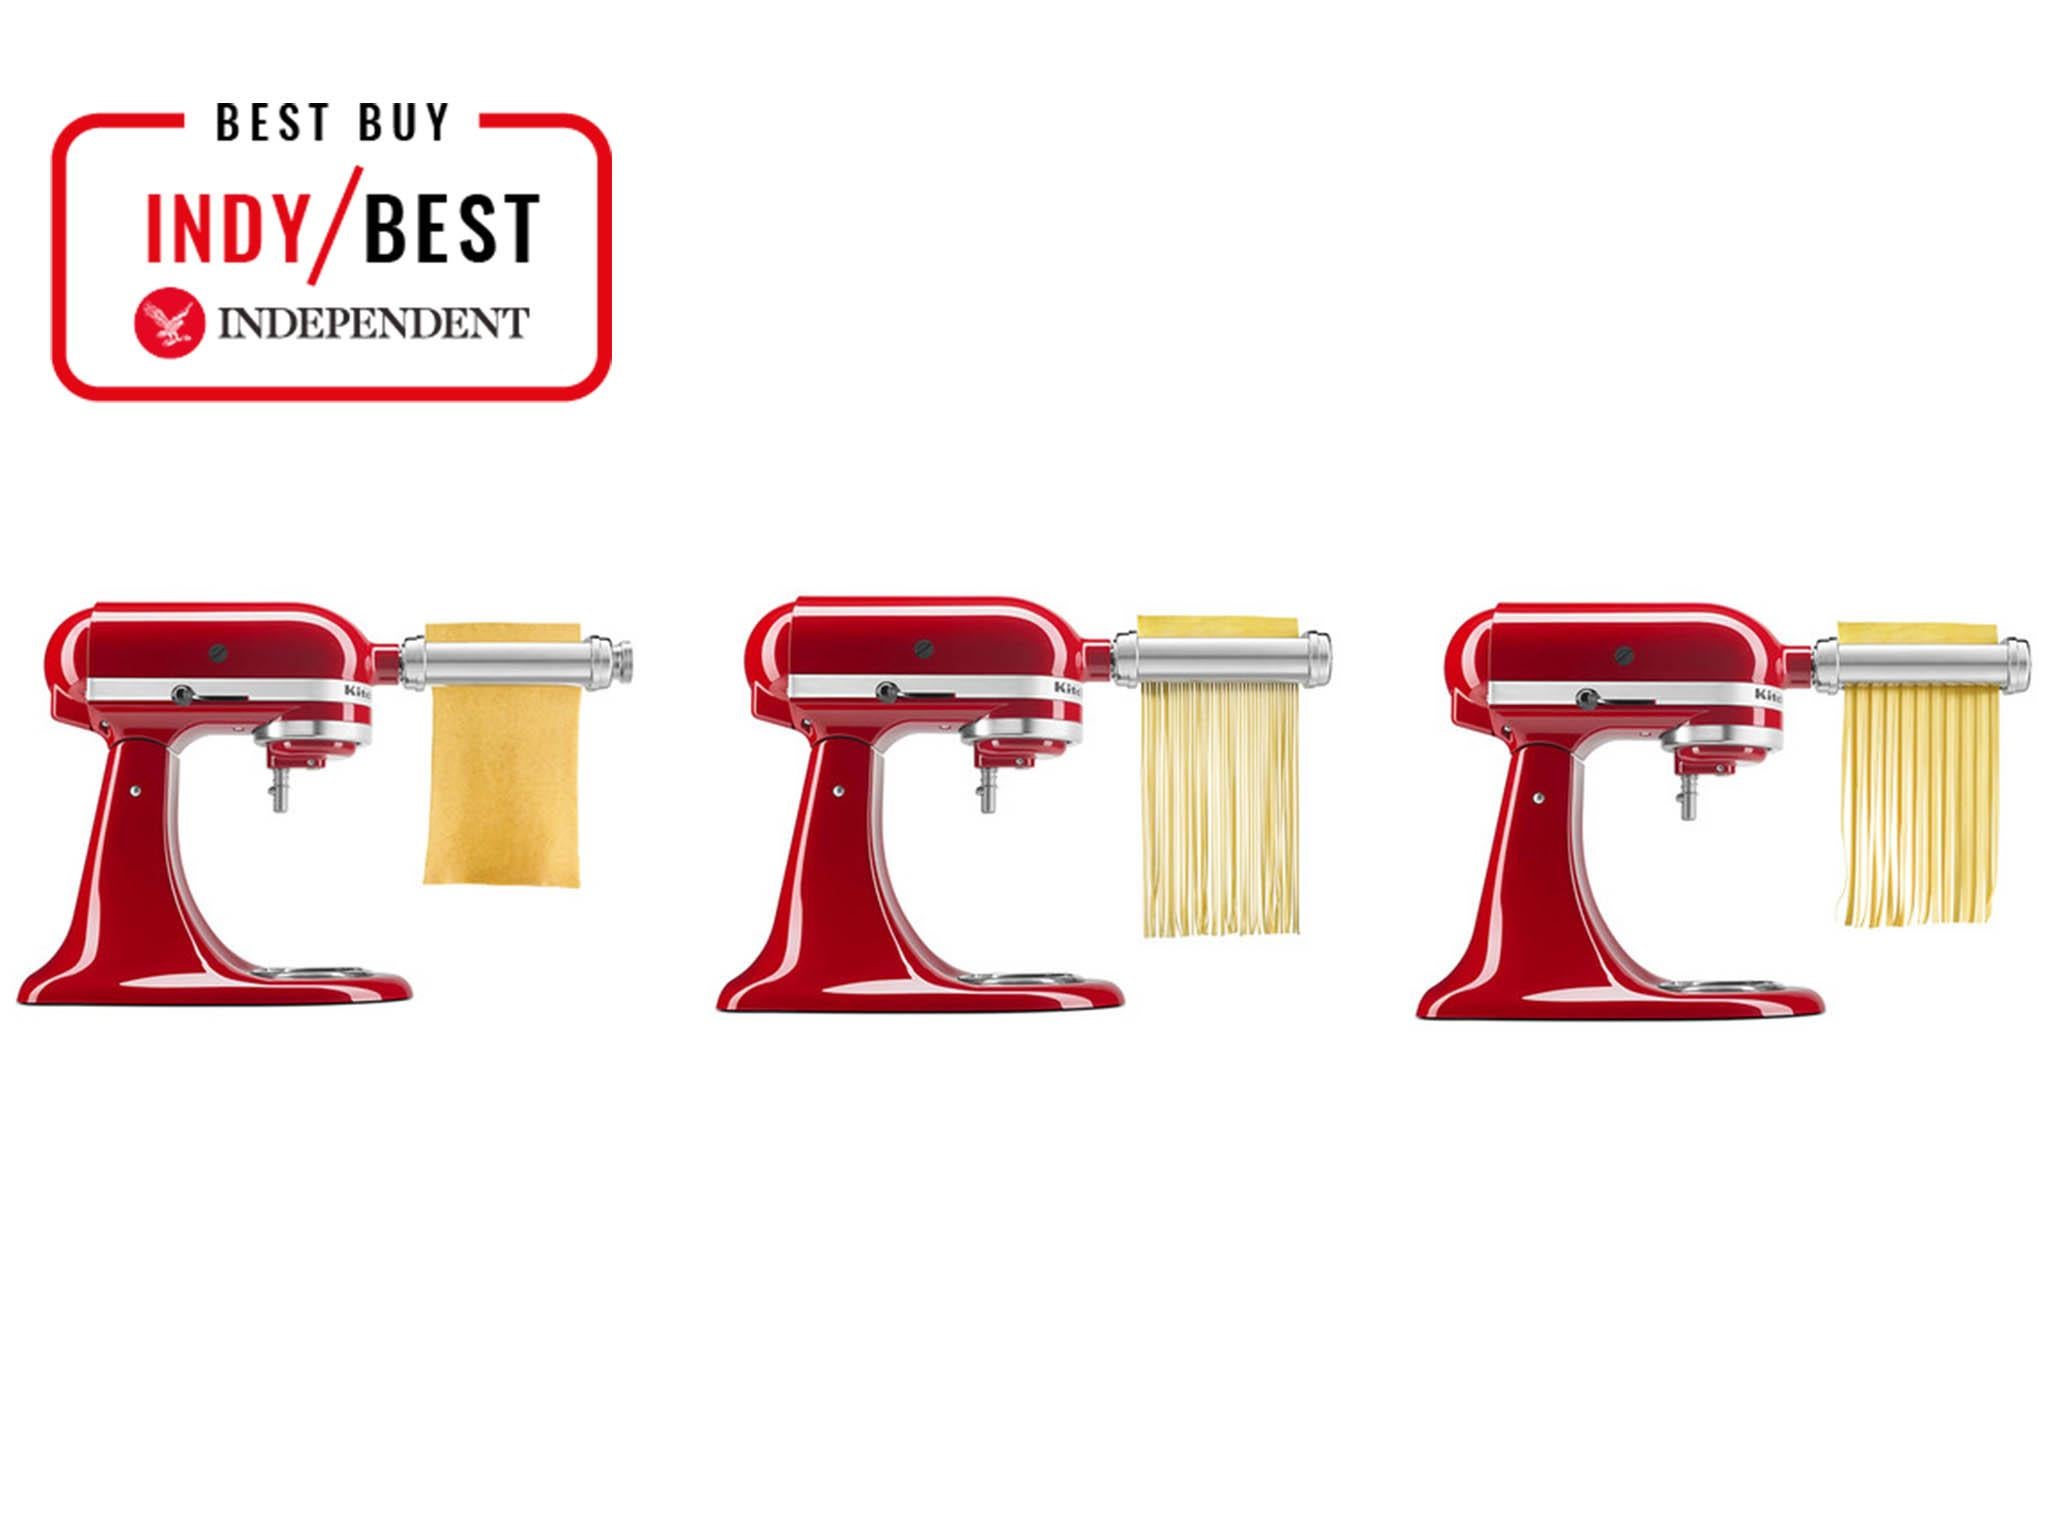 Put your Italian chef hat on and cook up tagliatelle, lasagne sheets and more with a pasta machine